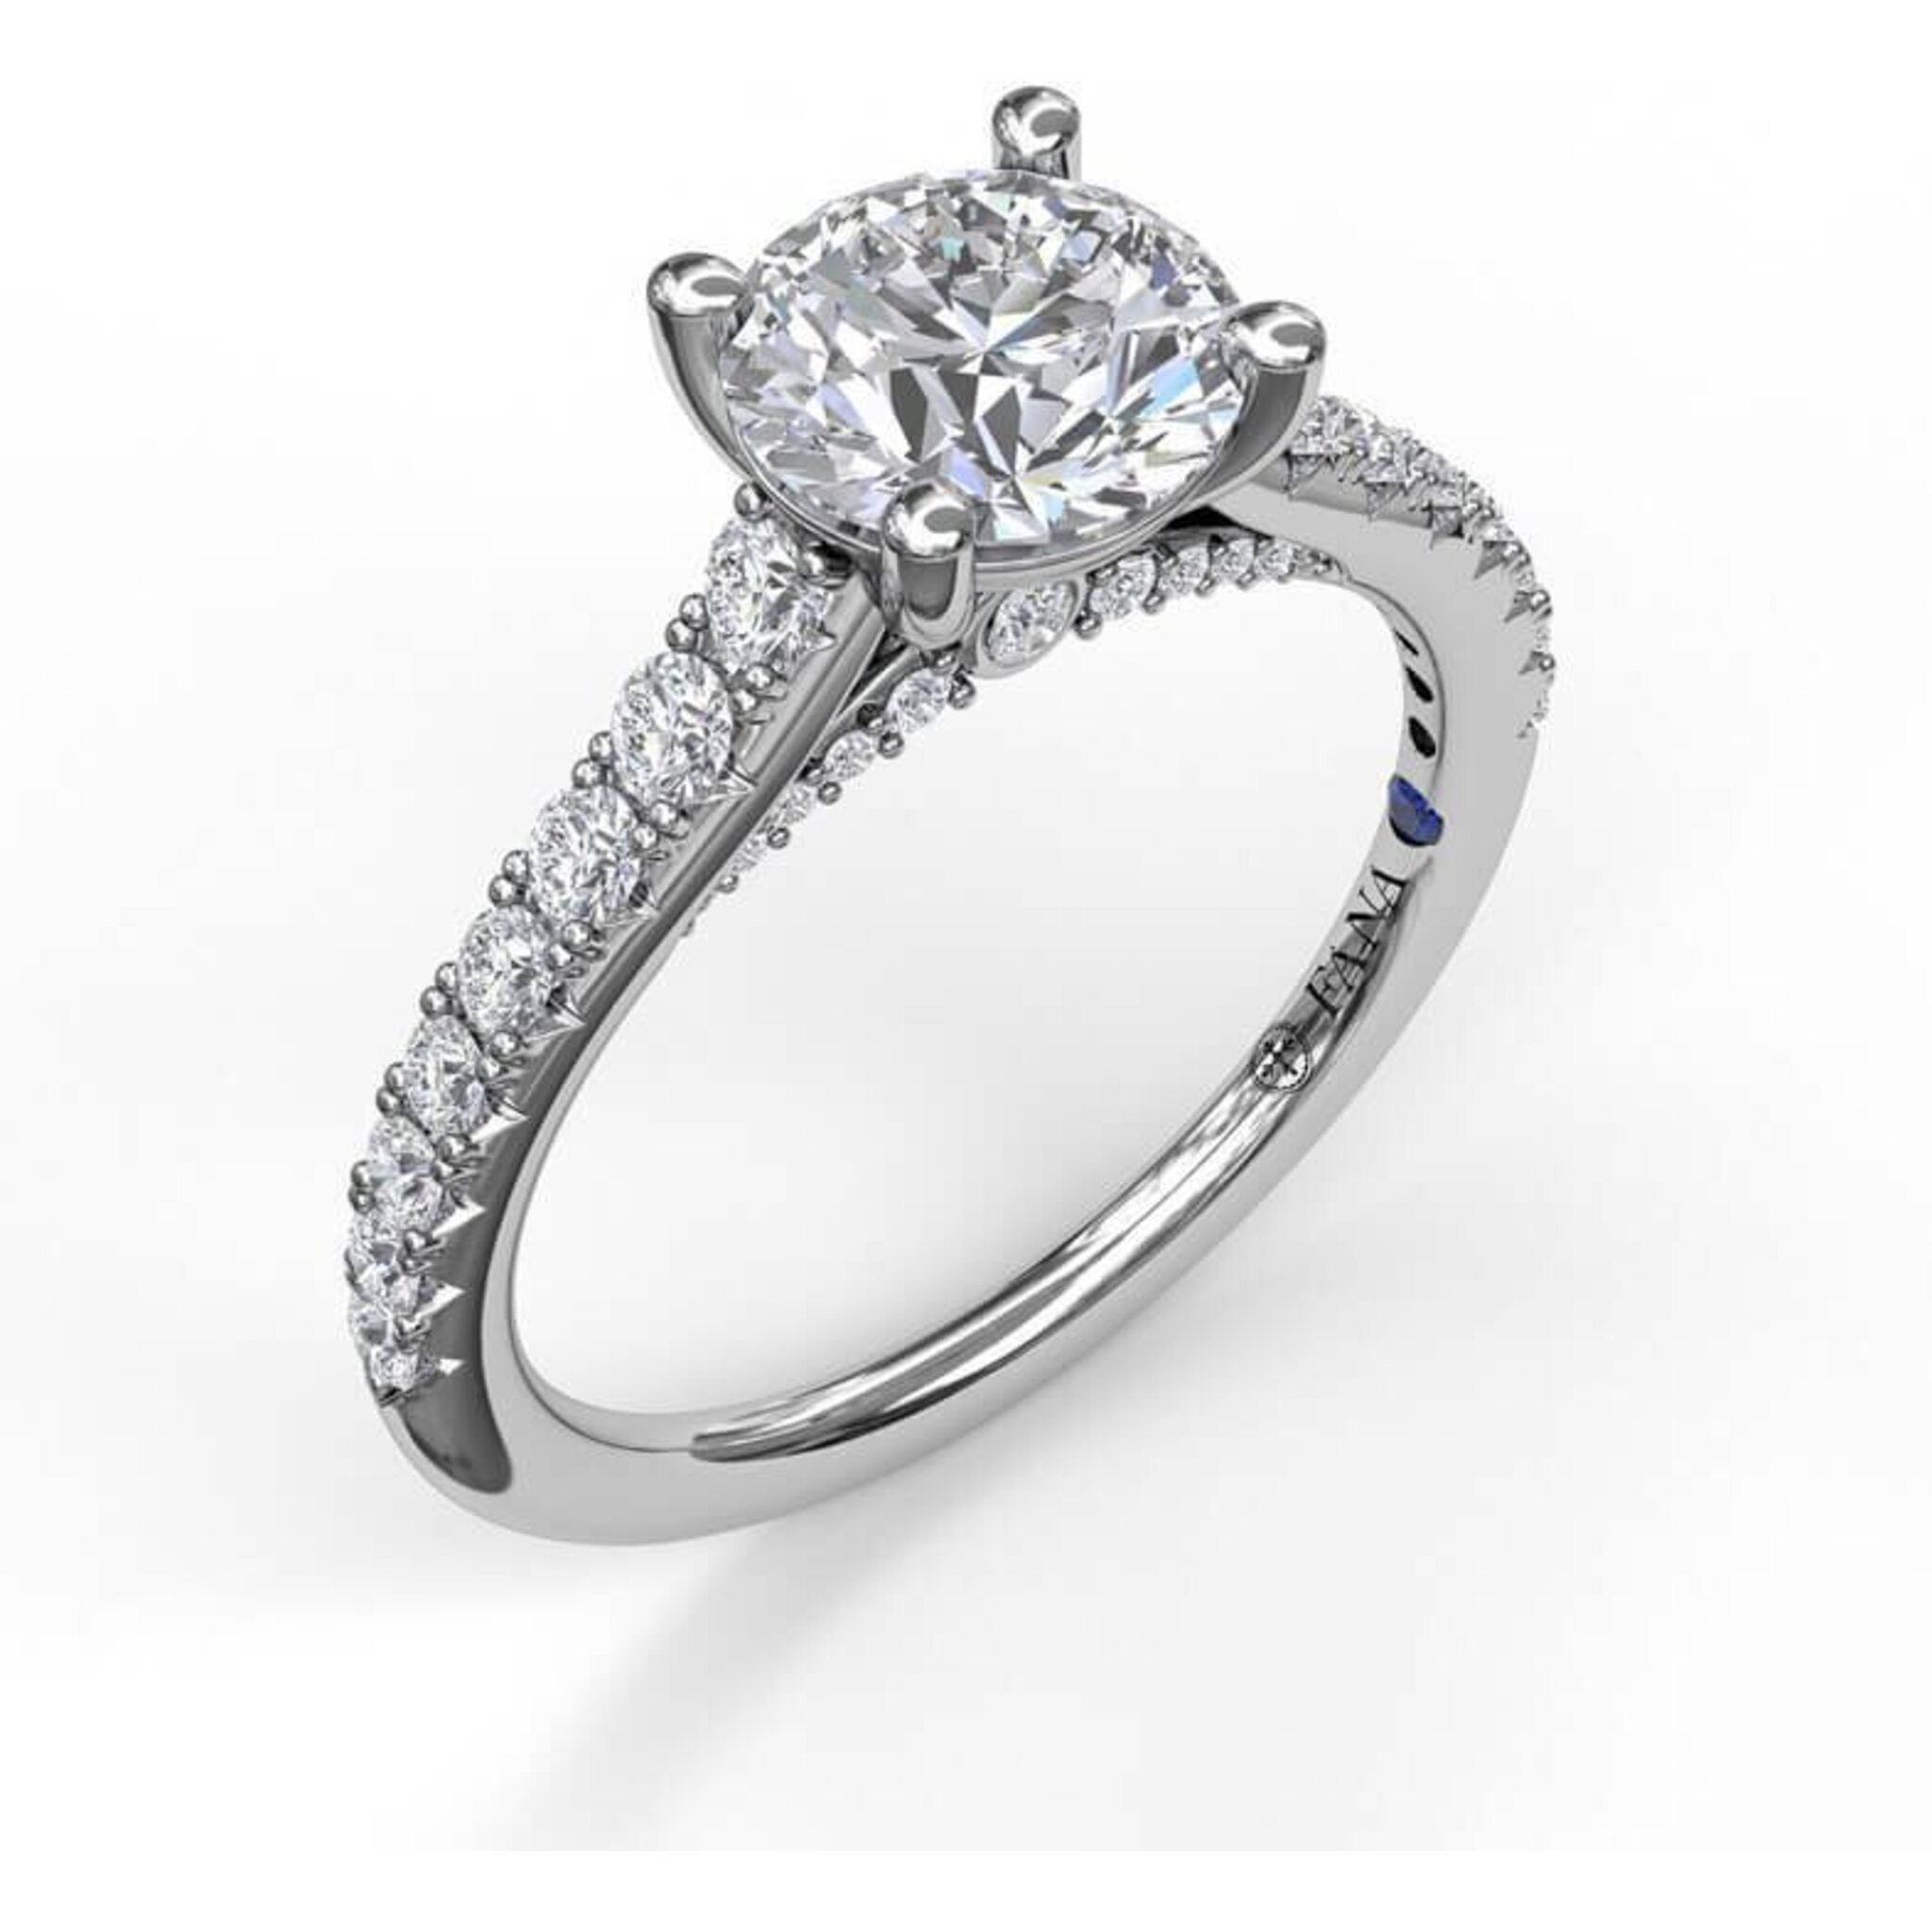 Fana Delicate Classic Engagement Ring with Delicate Side Detail